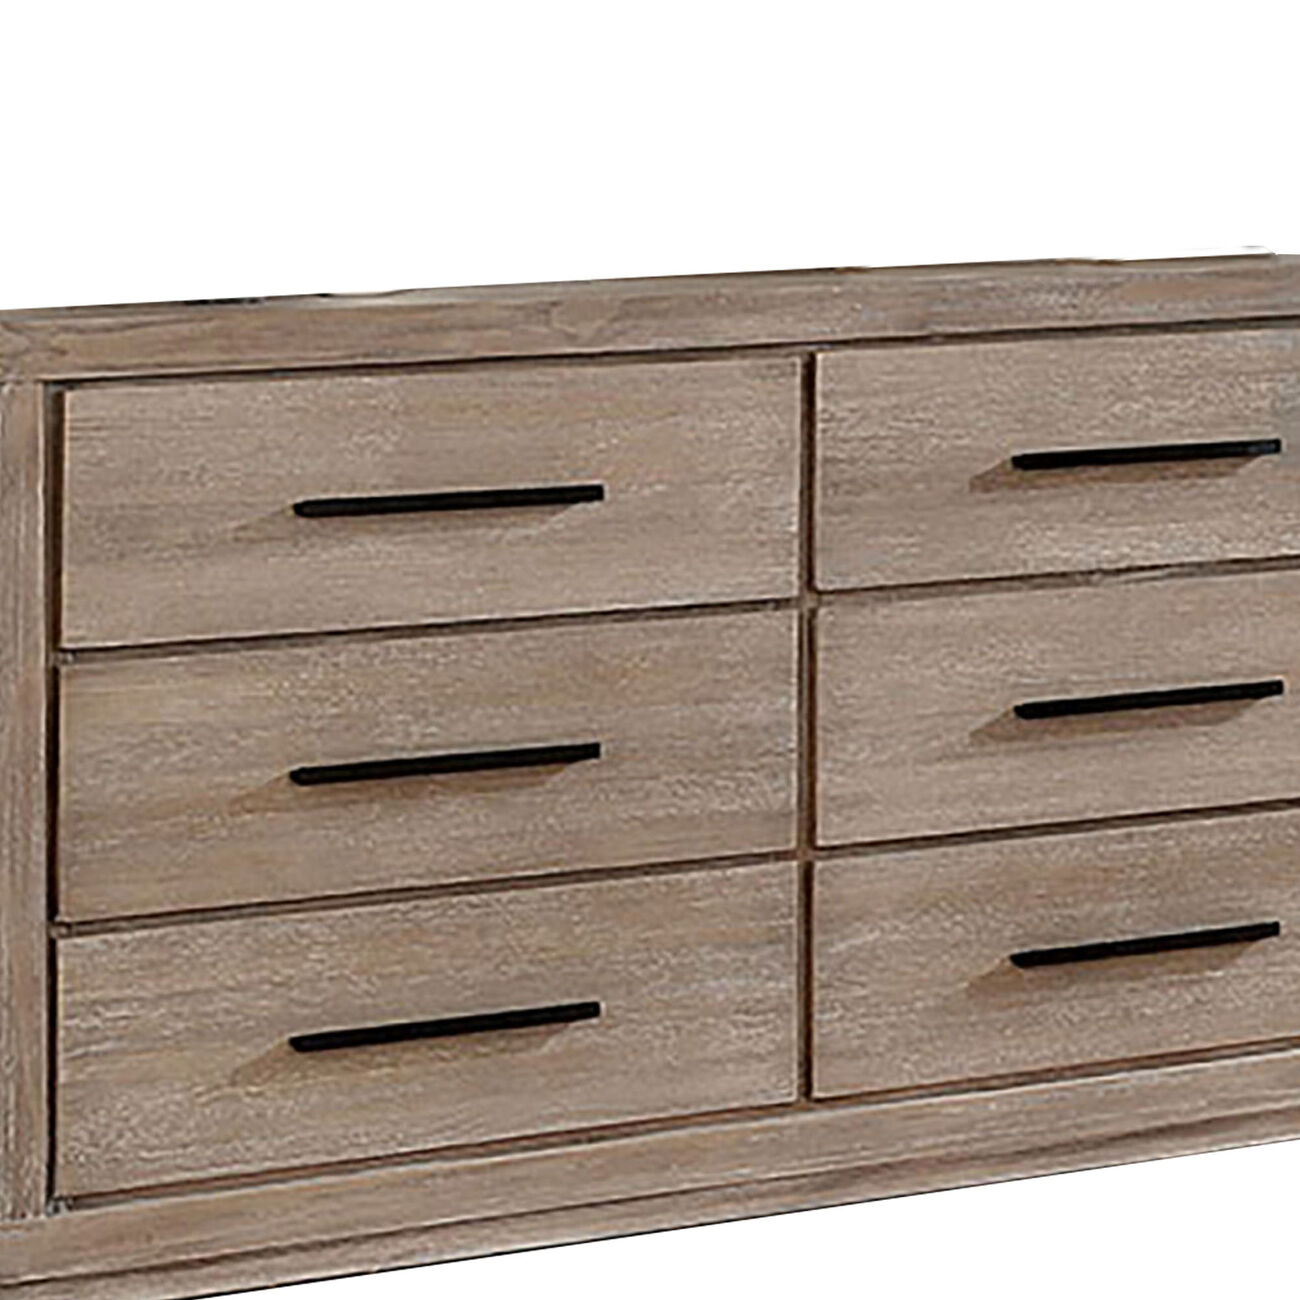 6 Drawer Transitional Style Wooden Dresser with Bar Handles, Brown